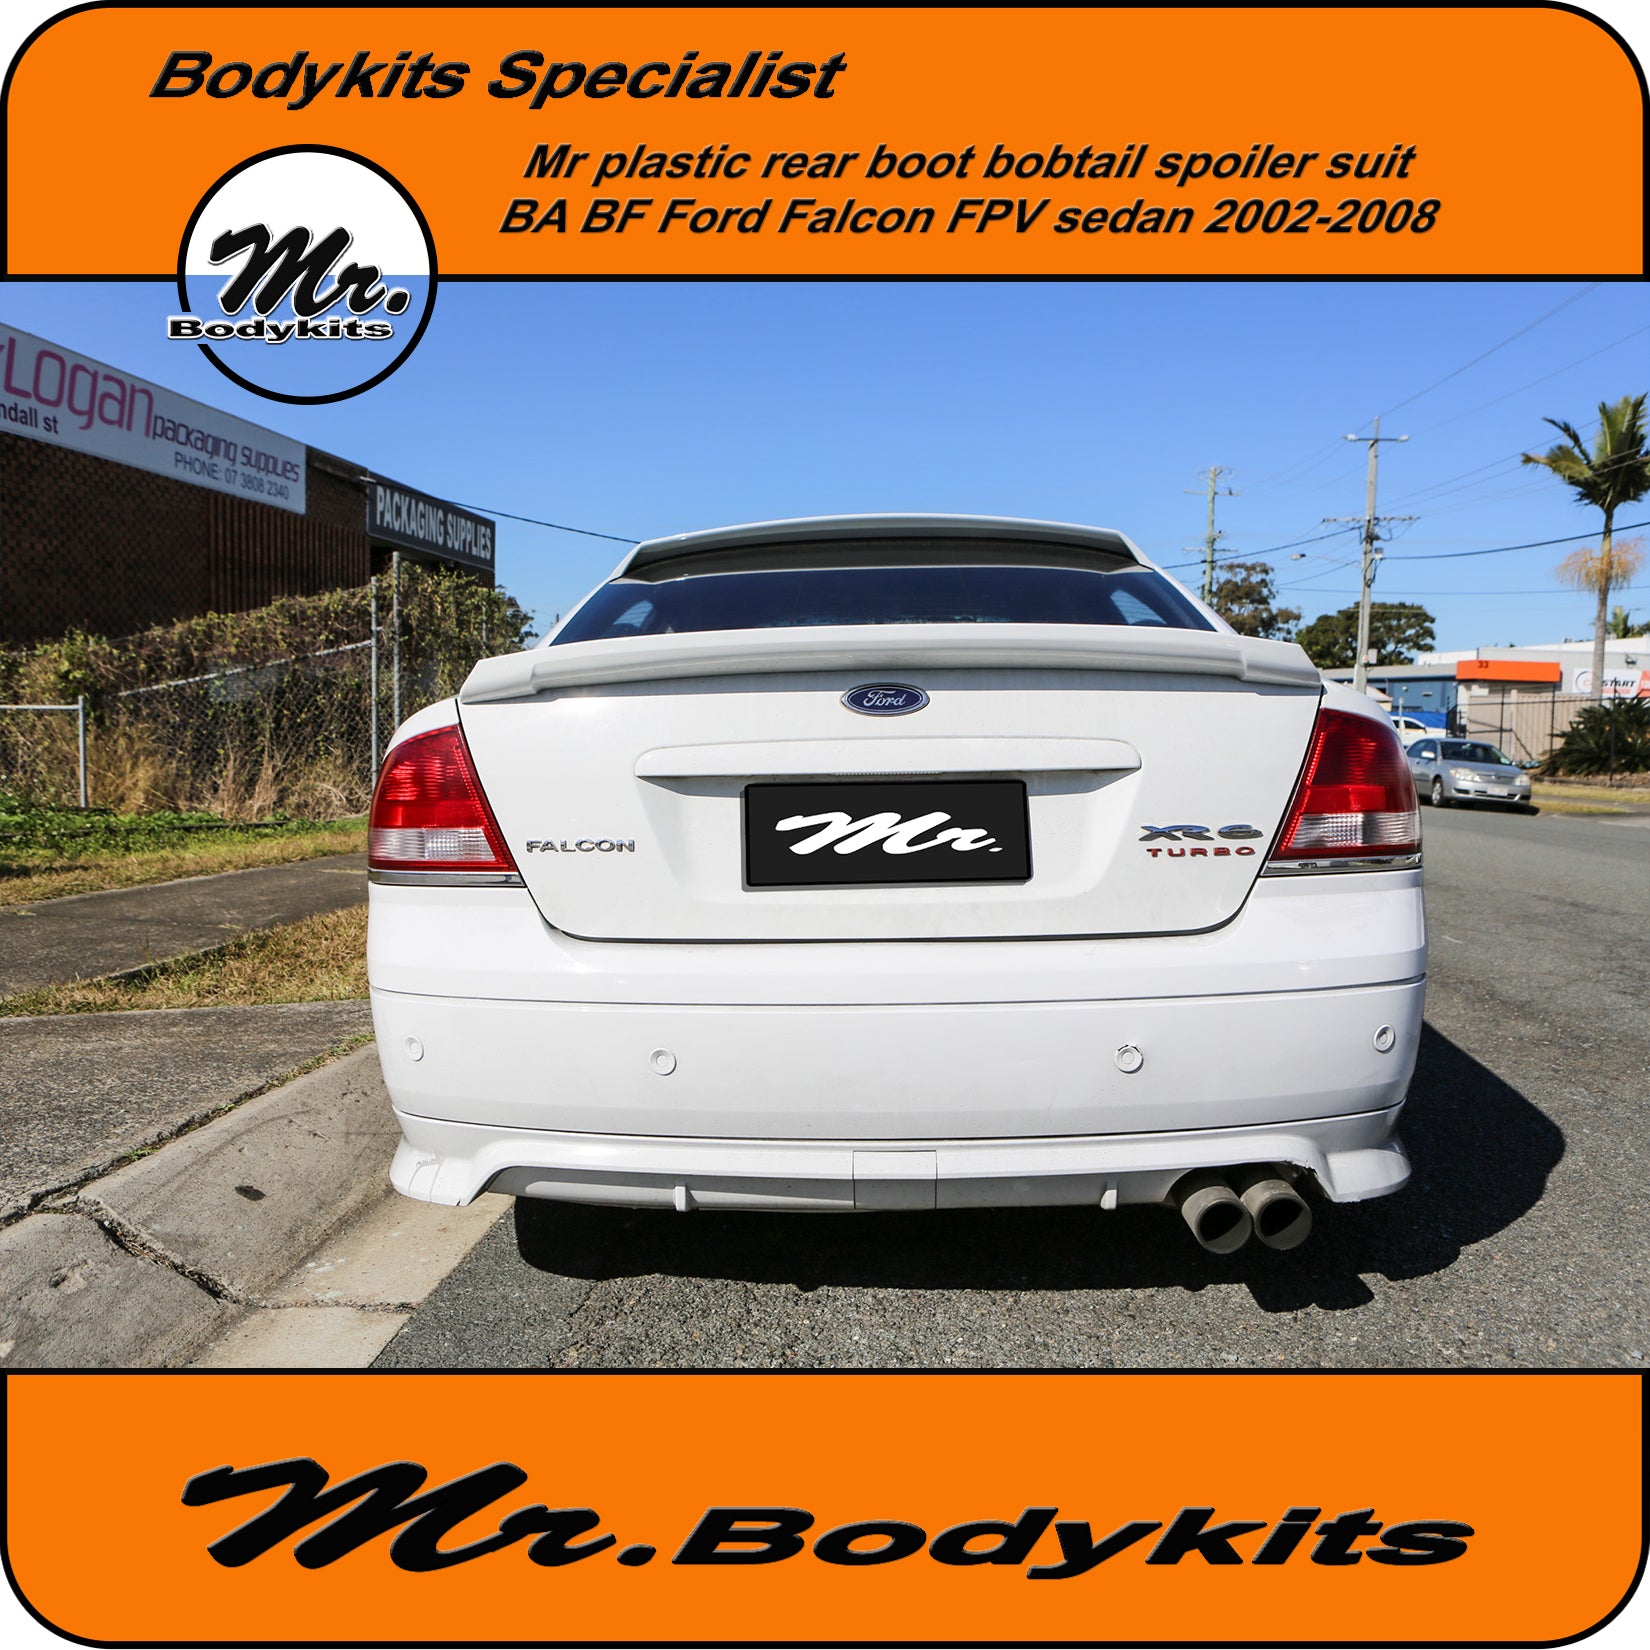 Rear Boot Wing Spoiler for BA / BF Ford Falcon Sedan - V8 Supercar Sty –  Spoilers and Bodykits